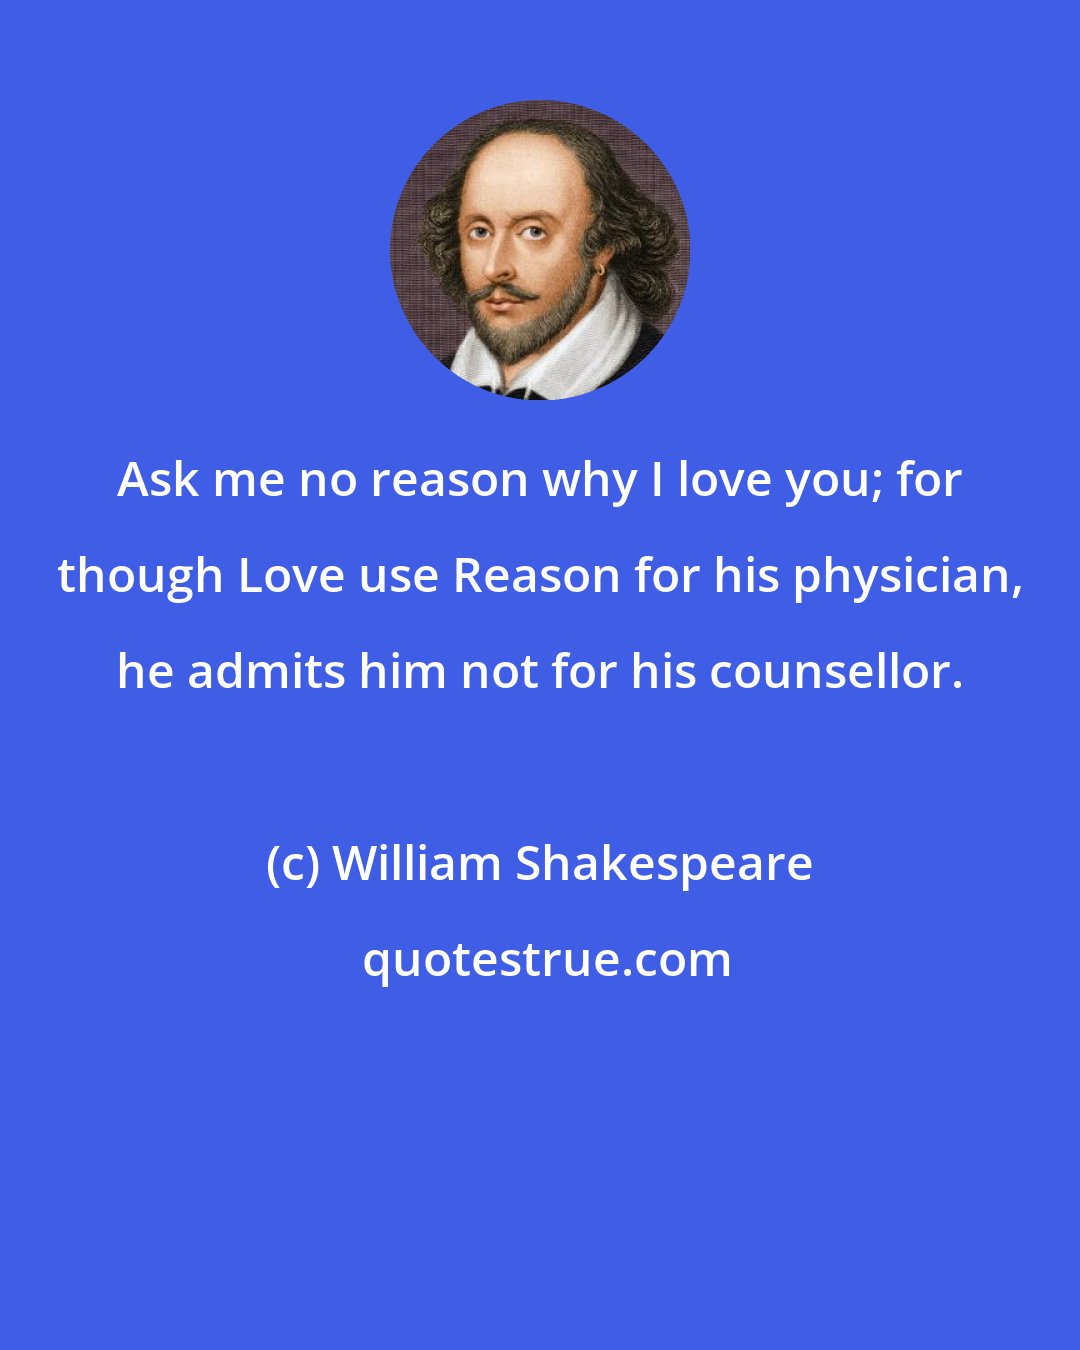 William Shakespeare: Ask me no reason why I love you; for though Love use Reason for his physician, he admits him not for his counsellor.